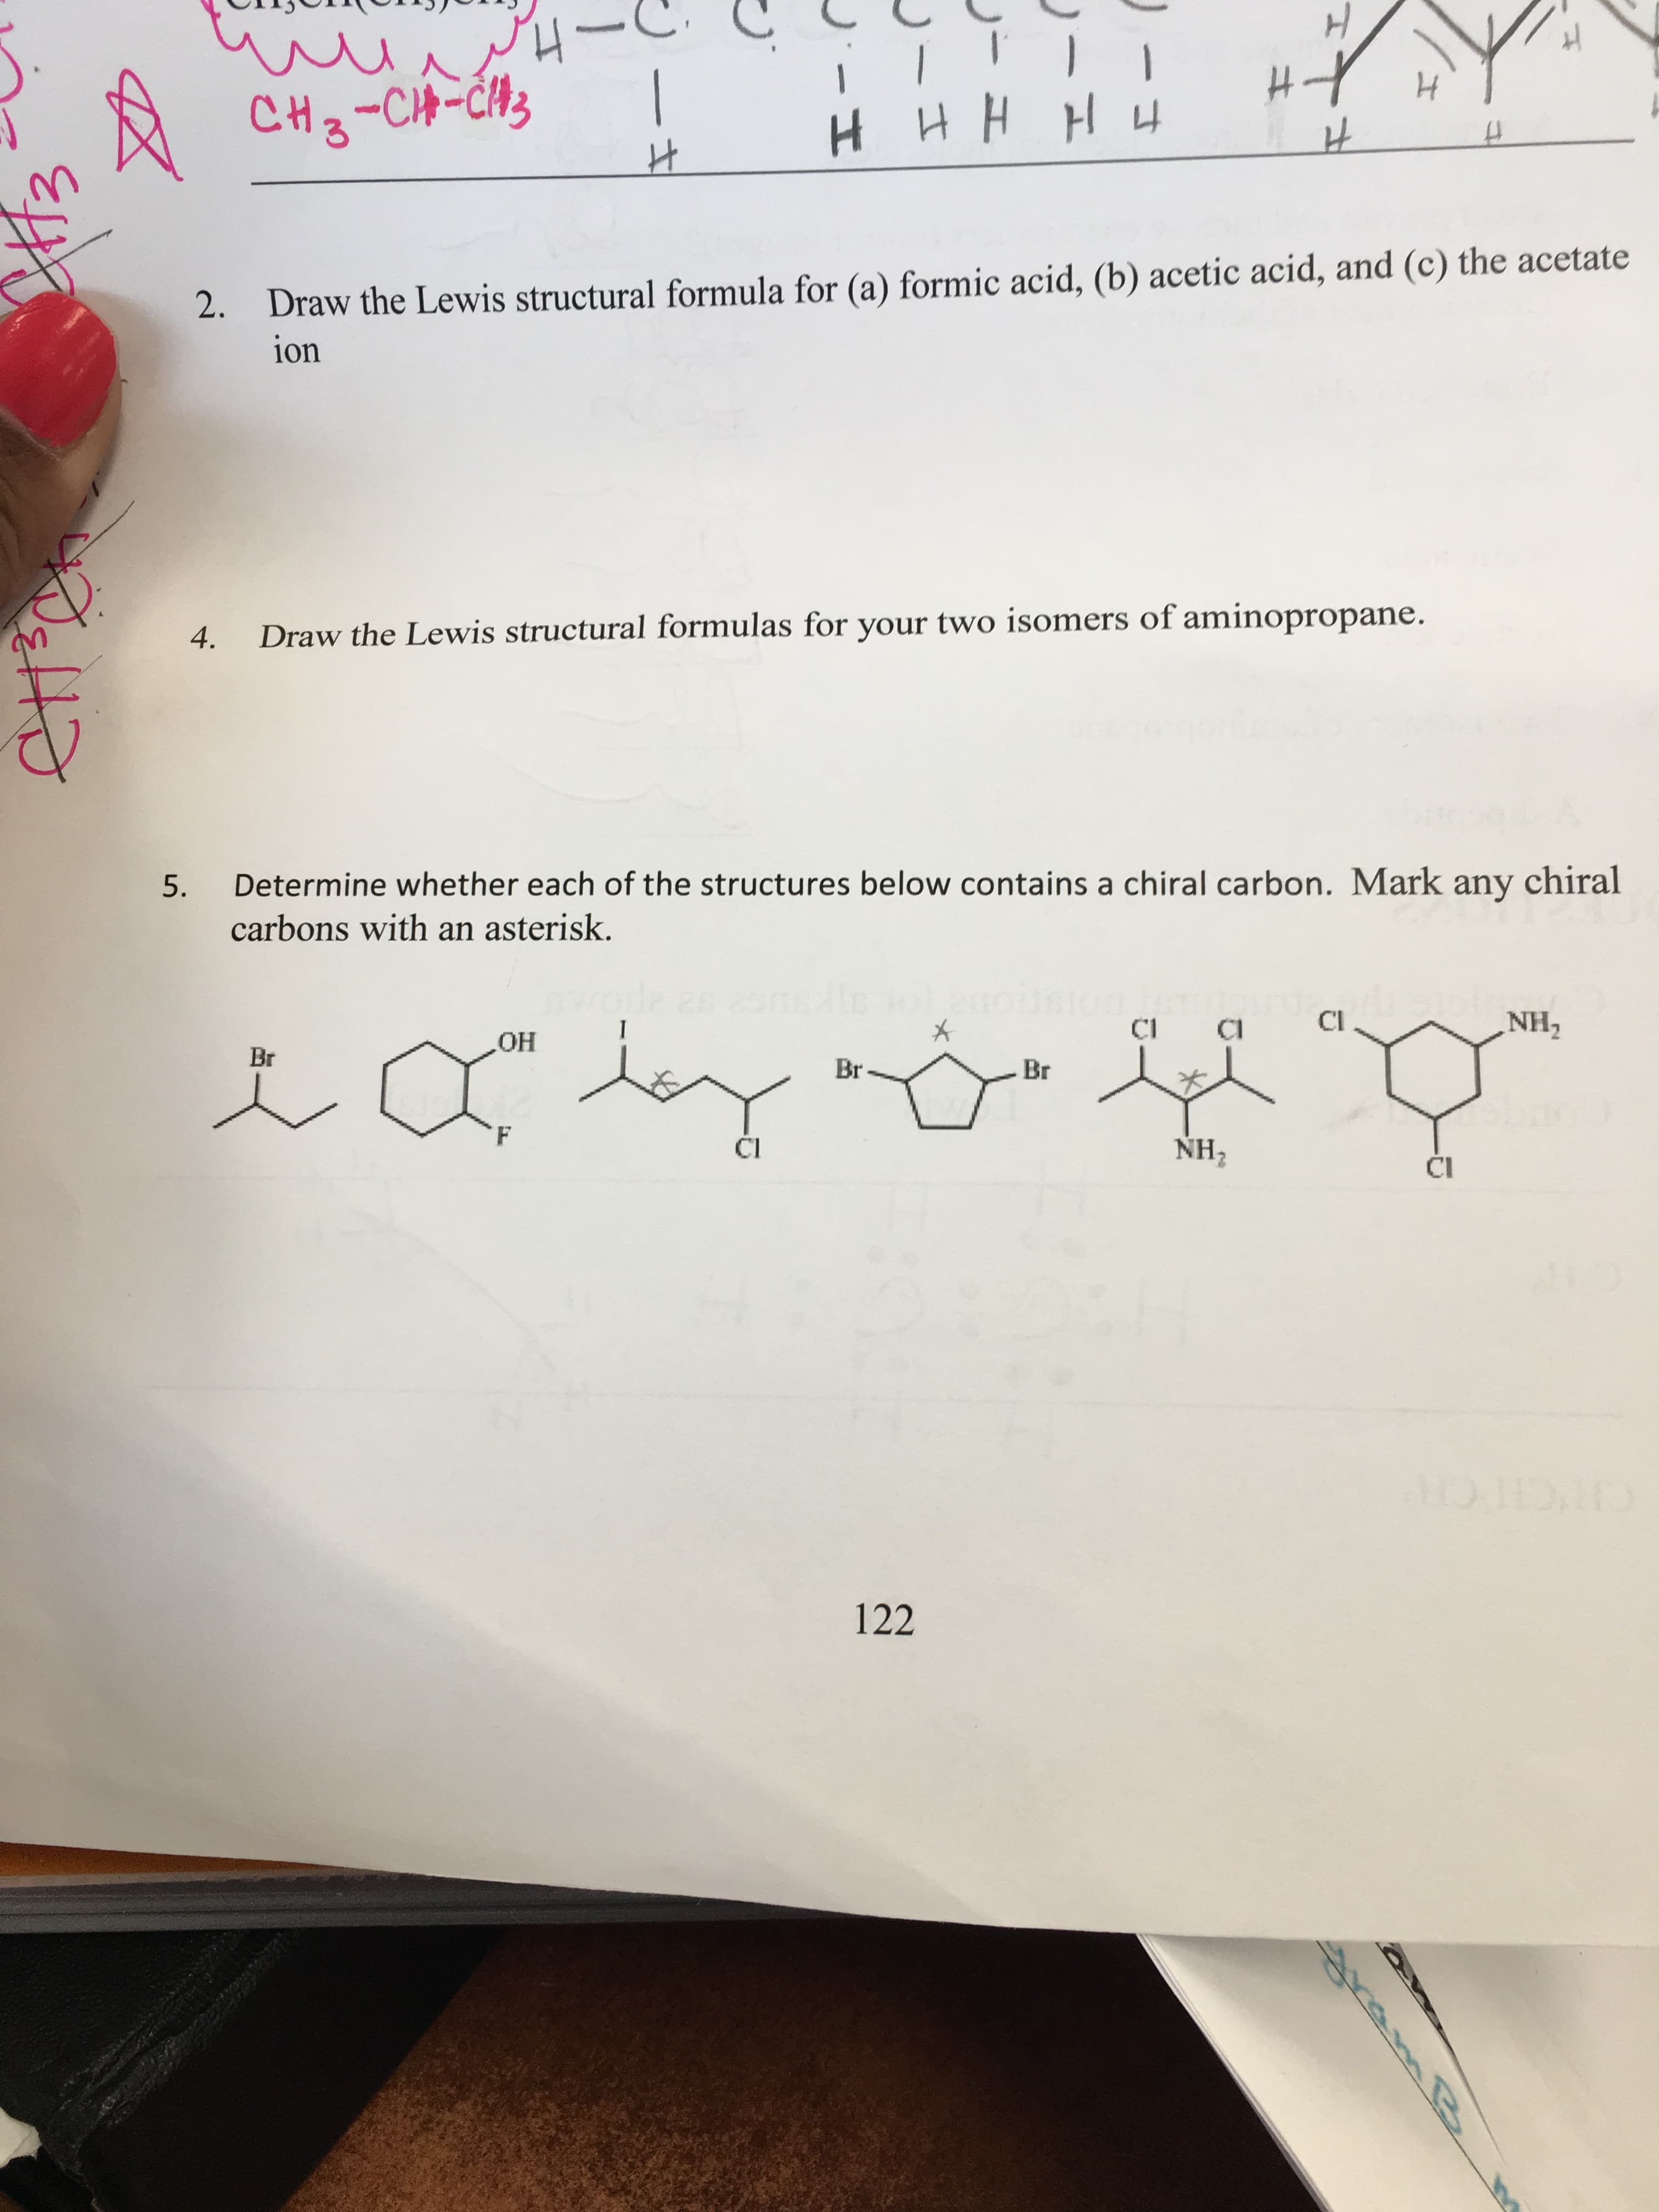 H
u
CH3-CH-CH
ИН Ни
HHHH
2. Draw the Lewis structural formula for (a) formic acid, (b) acetic acid, and (c) the acetate
ion
Draw the Lewis structural formulas for your two isomers of aminopropane.
4.
Determine whether each of the structures below contains a chiral carbon. Mark any chiral
5.
carbons with an asterisk.
2s
1
CI
NH2
mnoGOUNTCE Buca
Br
HO
Br
Br
NH2
Ci
CI
OHOXMO
122
क फर
